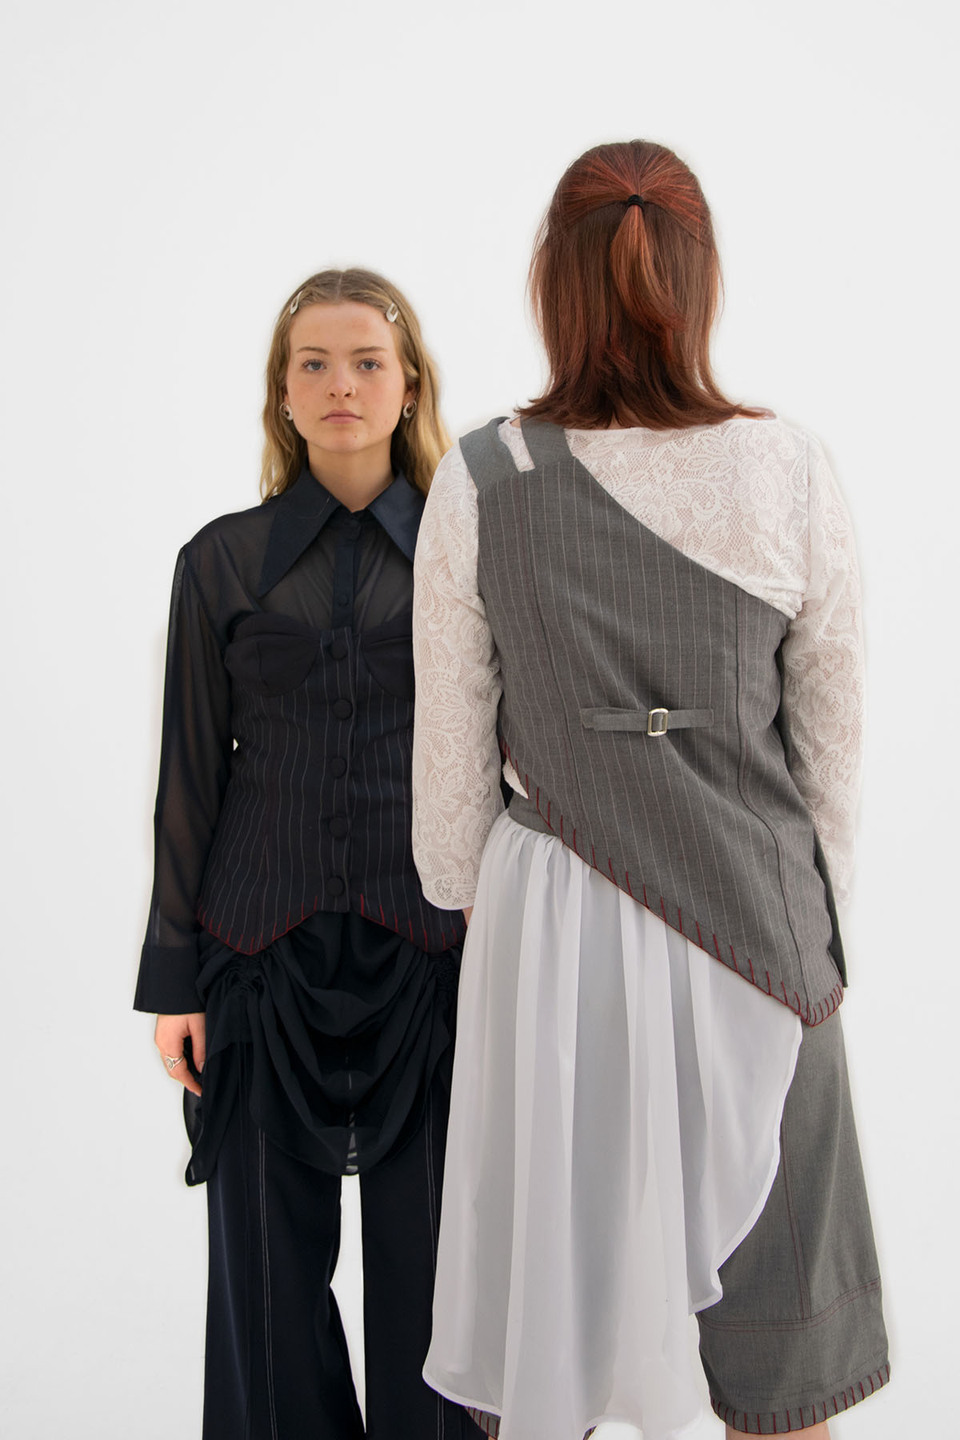 Two women model designs from the collection 'SKIN DEEP' by Sydney Omand